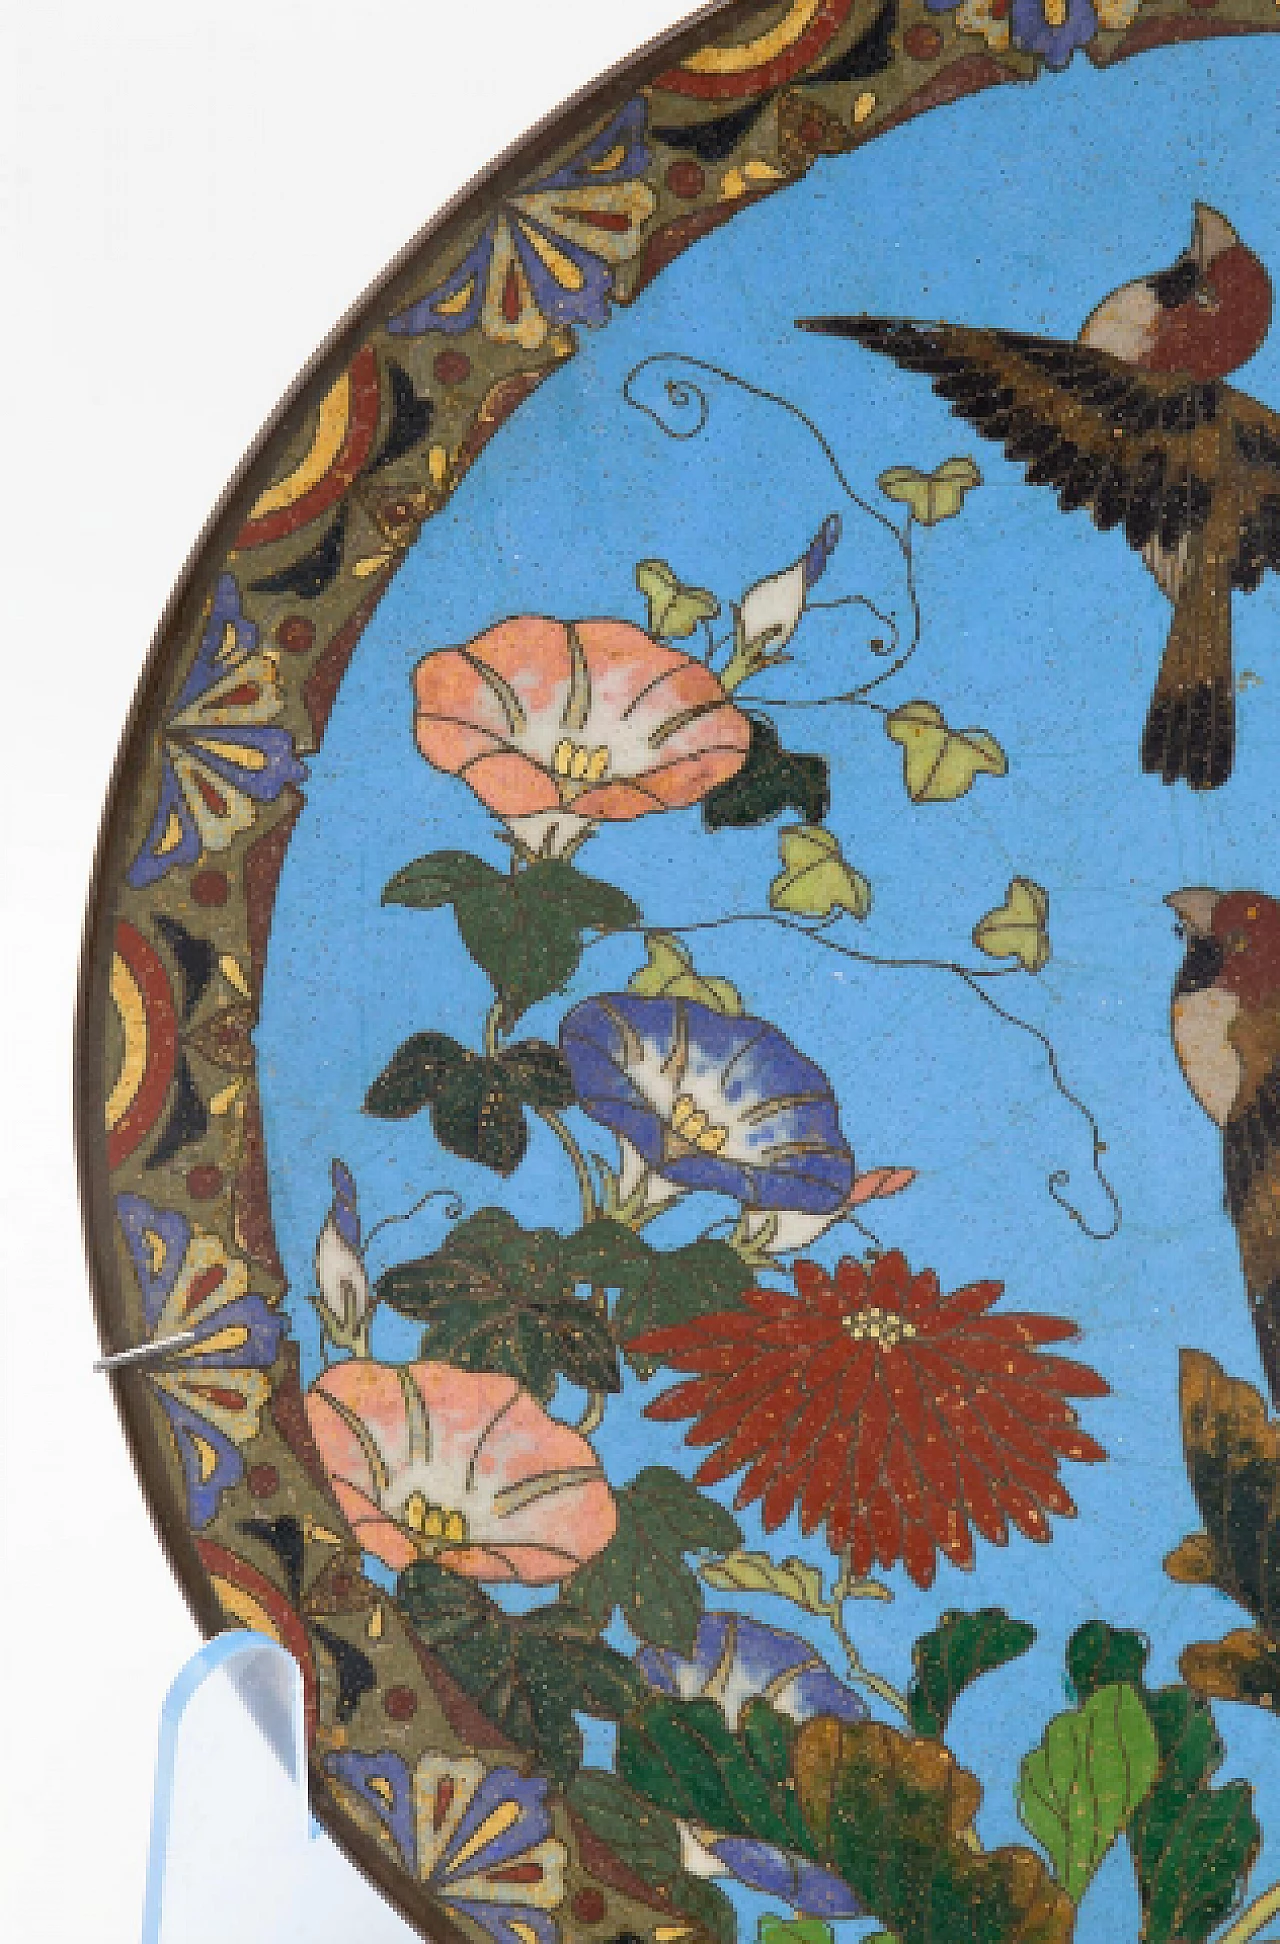 Chinese bronze and cloisonné enamel decorative plate with flowers and animals 4